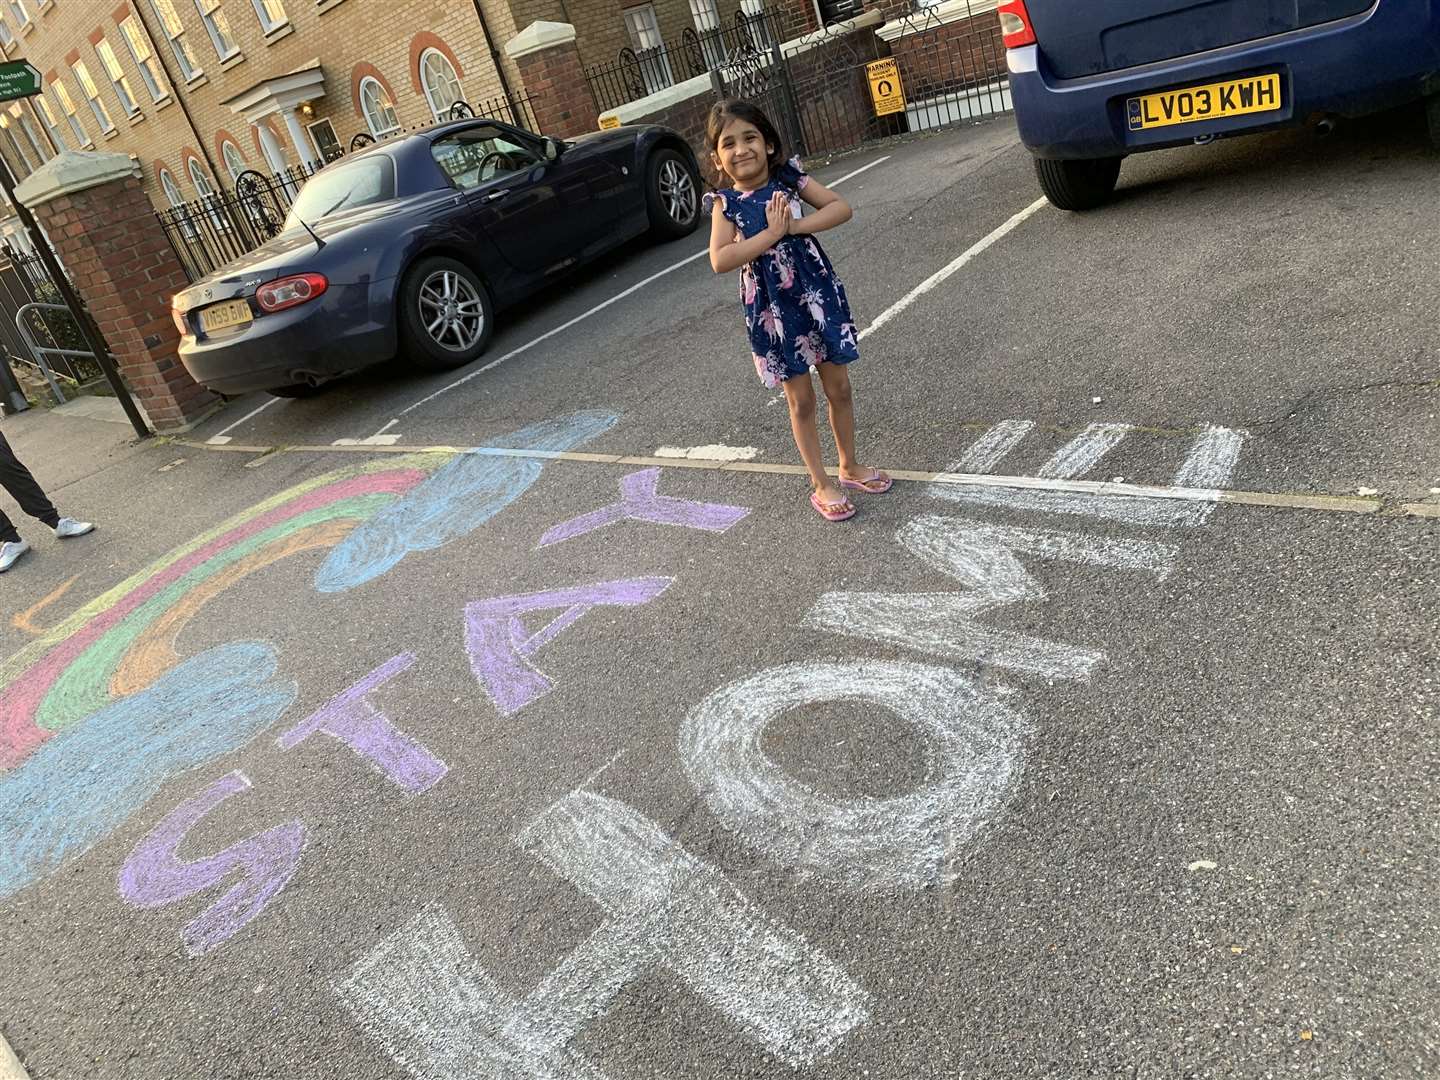 Mahi Joshi from Medway took this picture of her daughter Rutvi spreading the safety message.